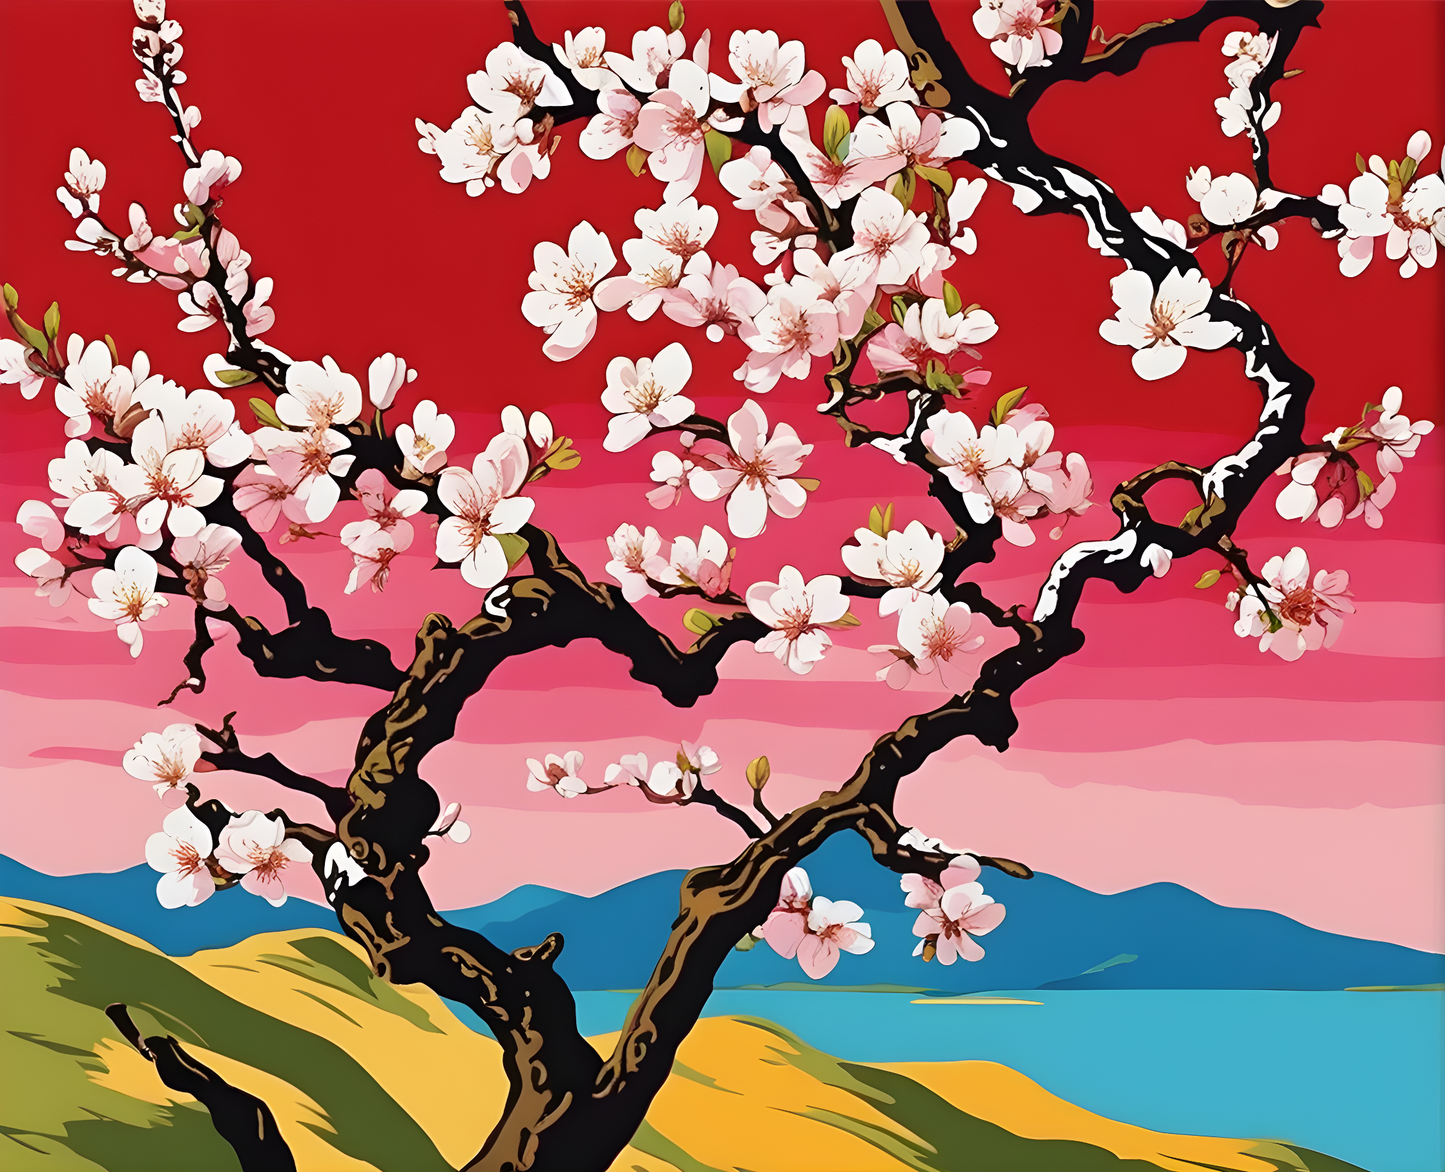 Branches of an almond tree in Blossom PD - Van-Go Paint-By-Number Kit